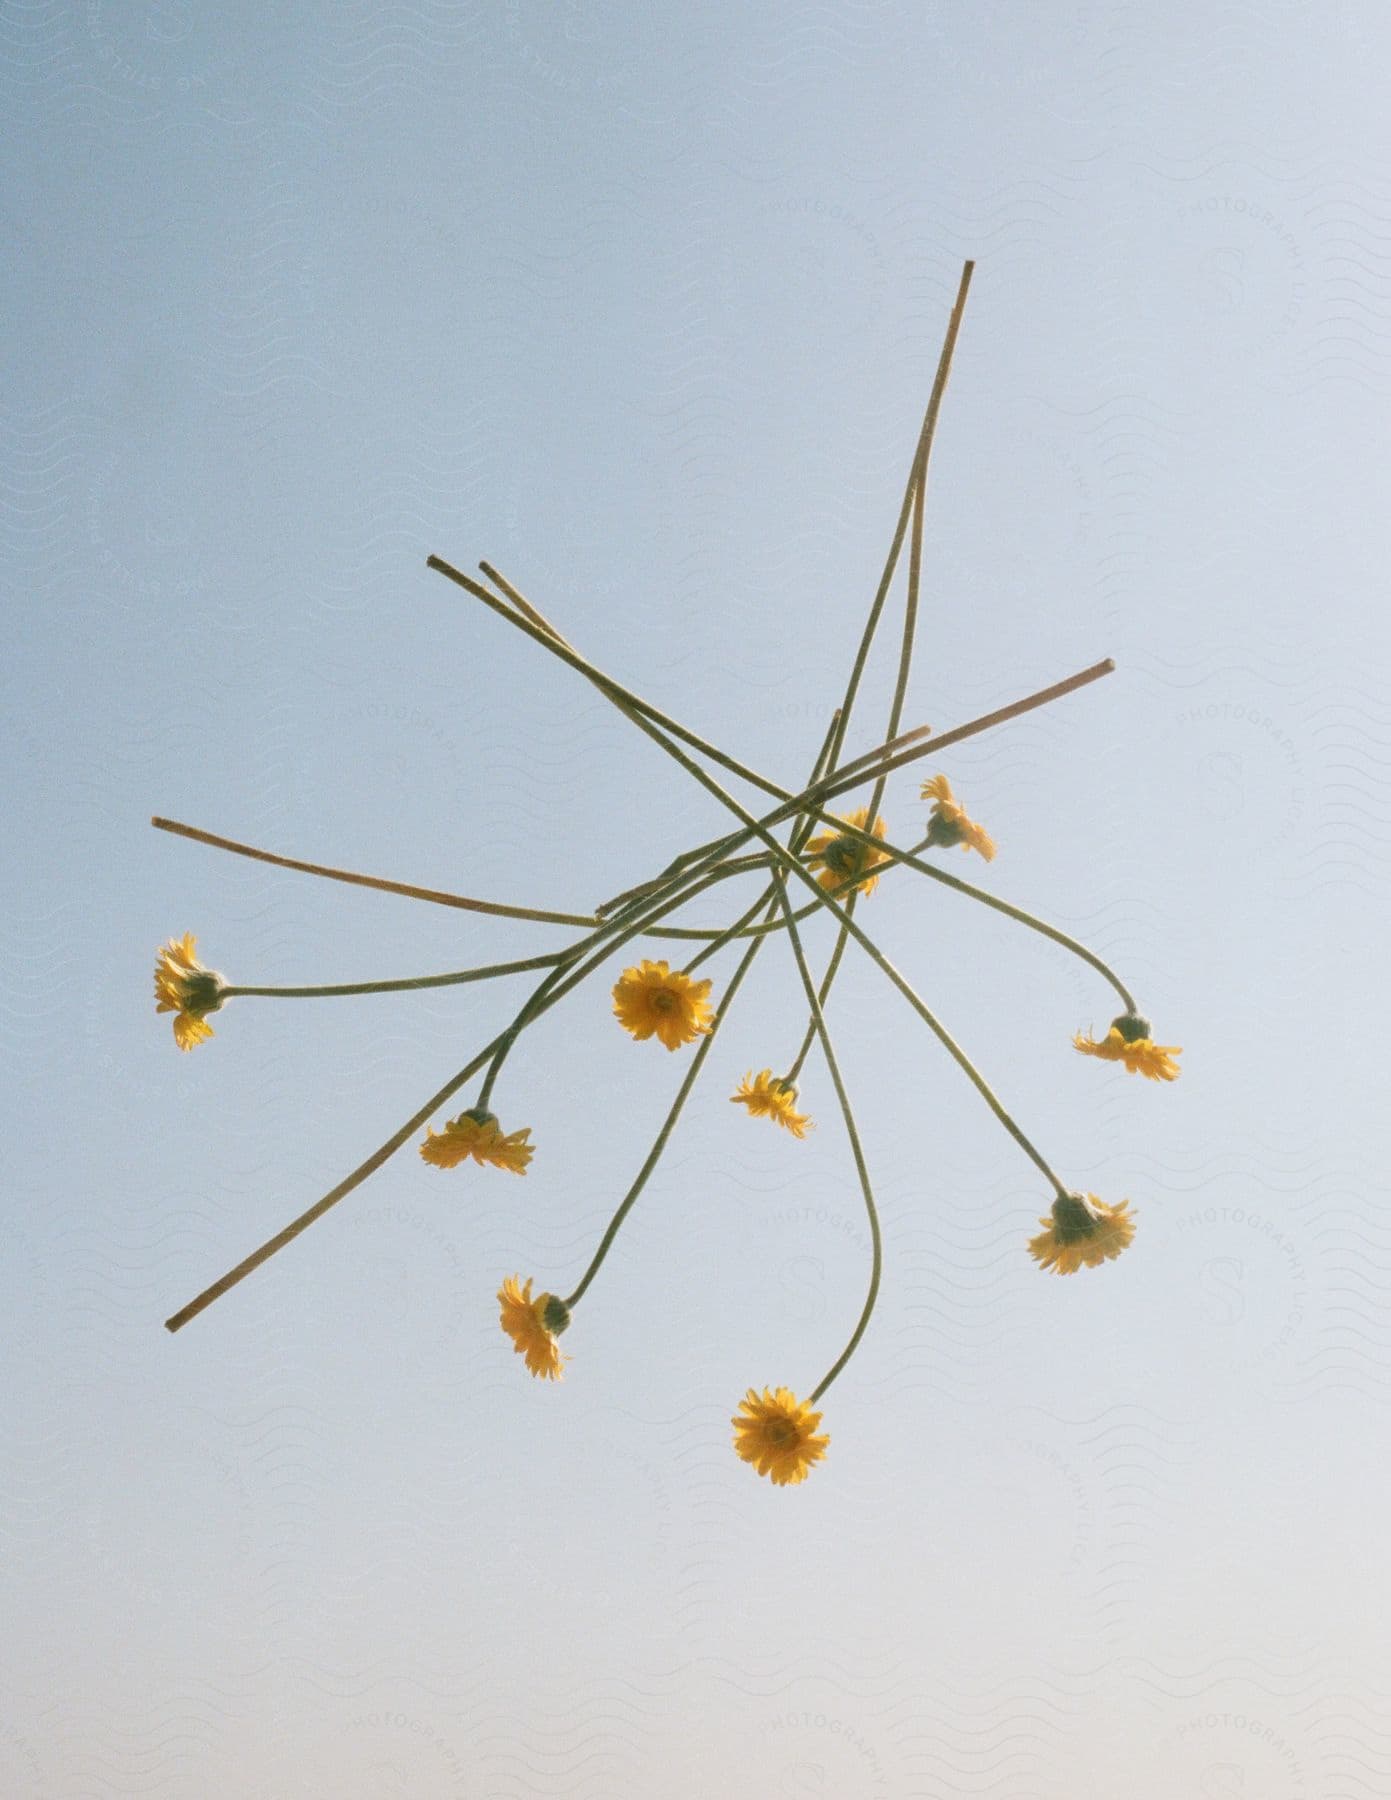 Scattered yellow flowers with long stems on a white background